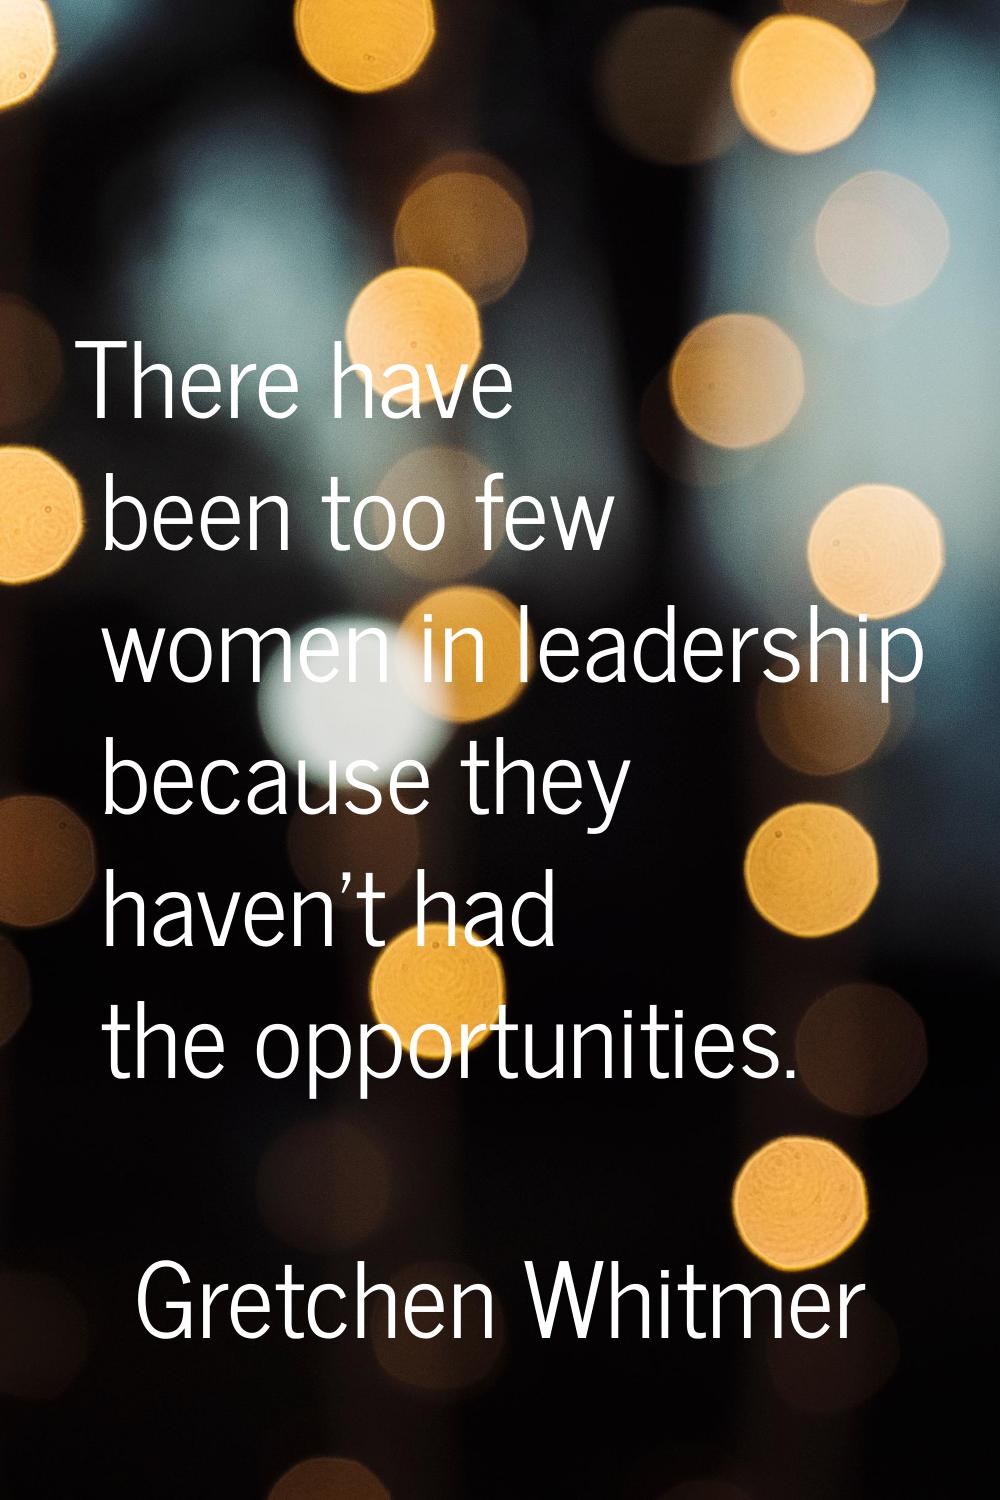 There have been too few women in leadership because they haven't had the opportunities.